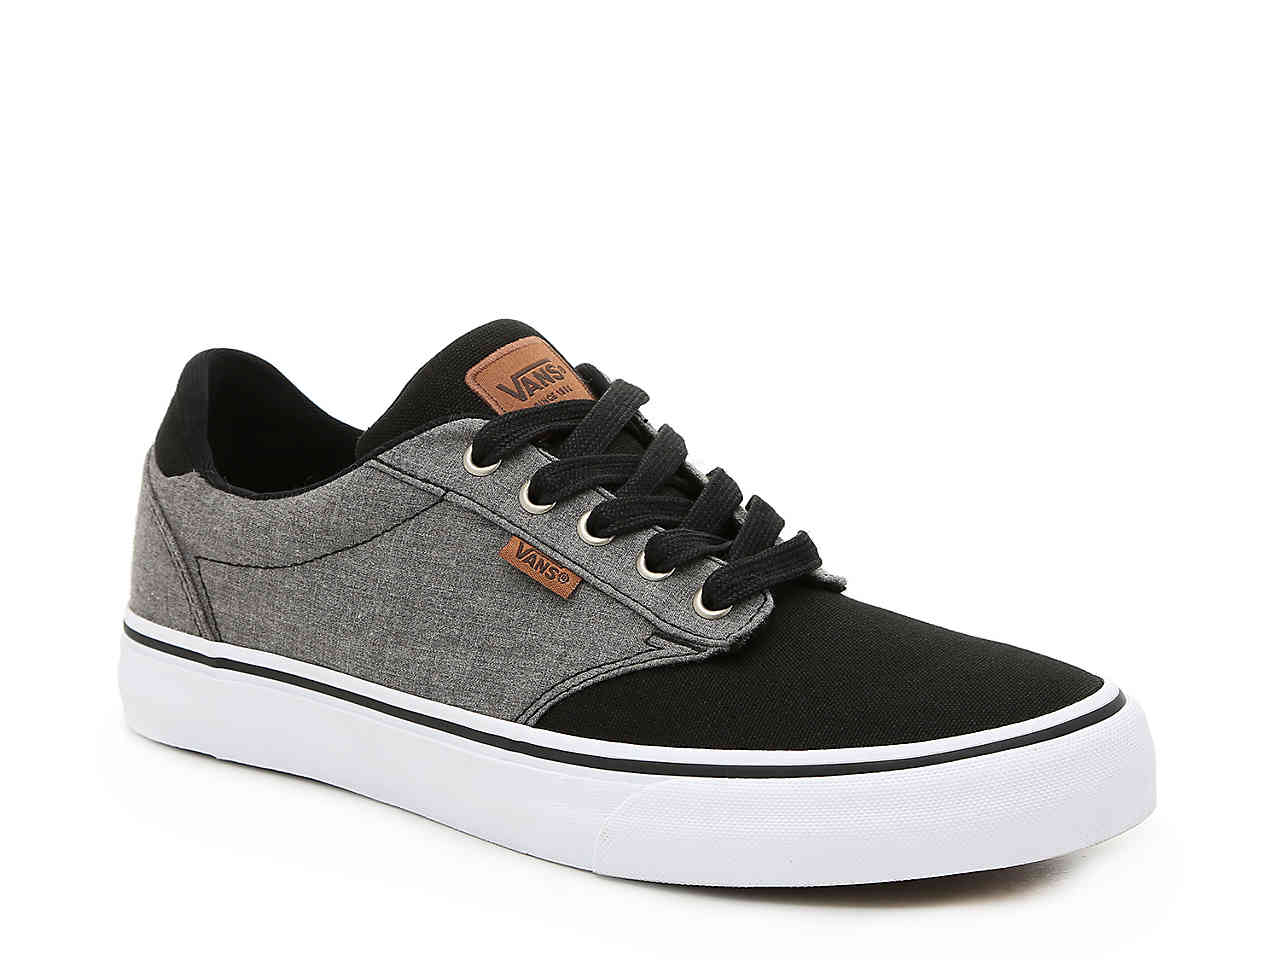 Vans Atwood Youth Black/Grey (3.0 